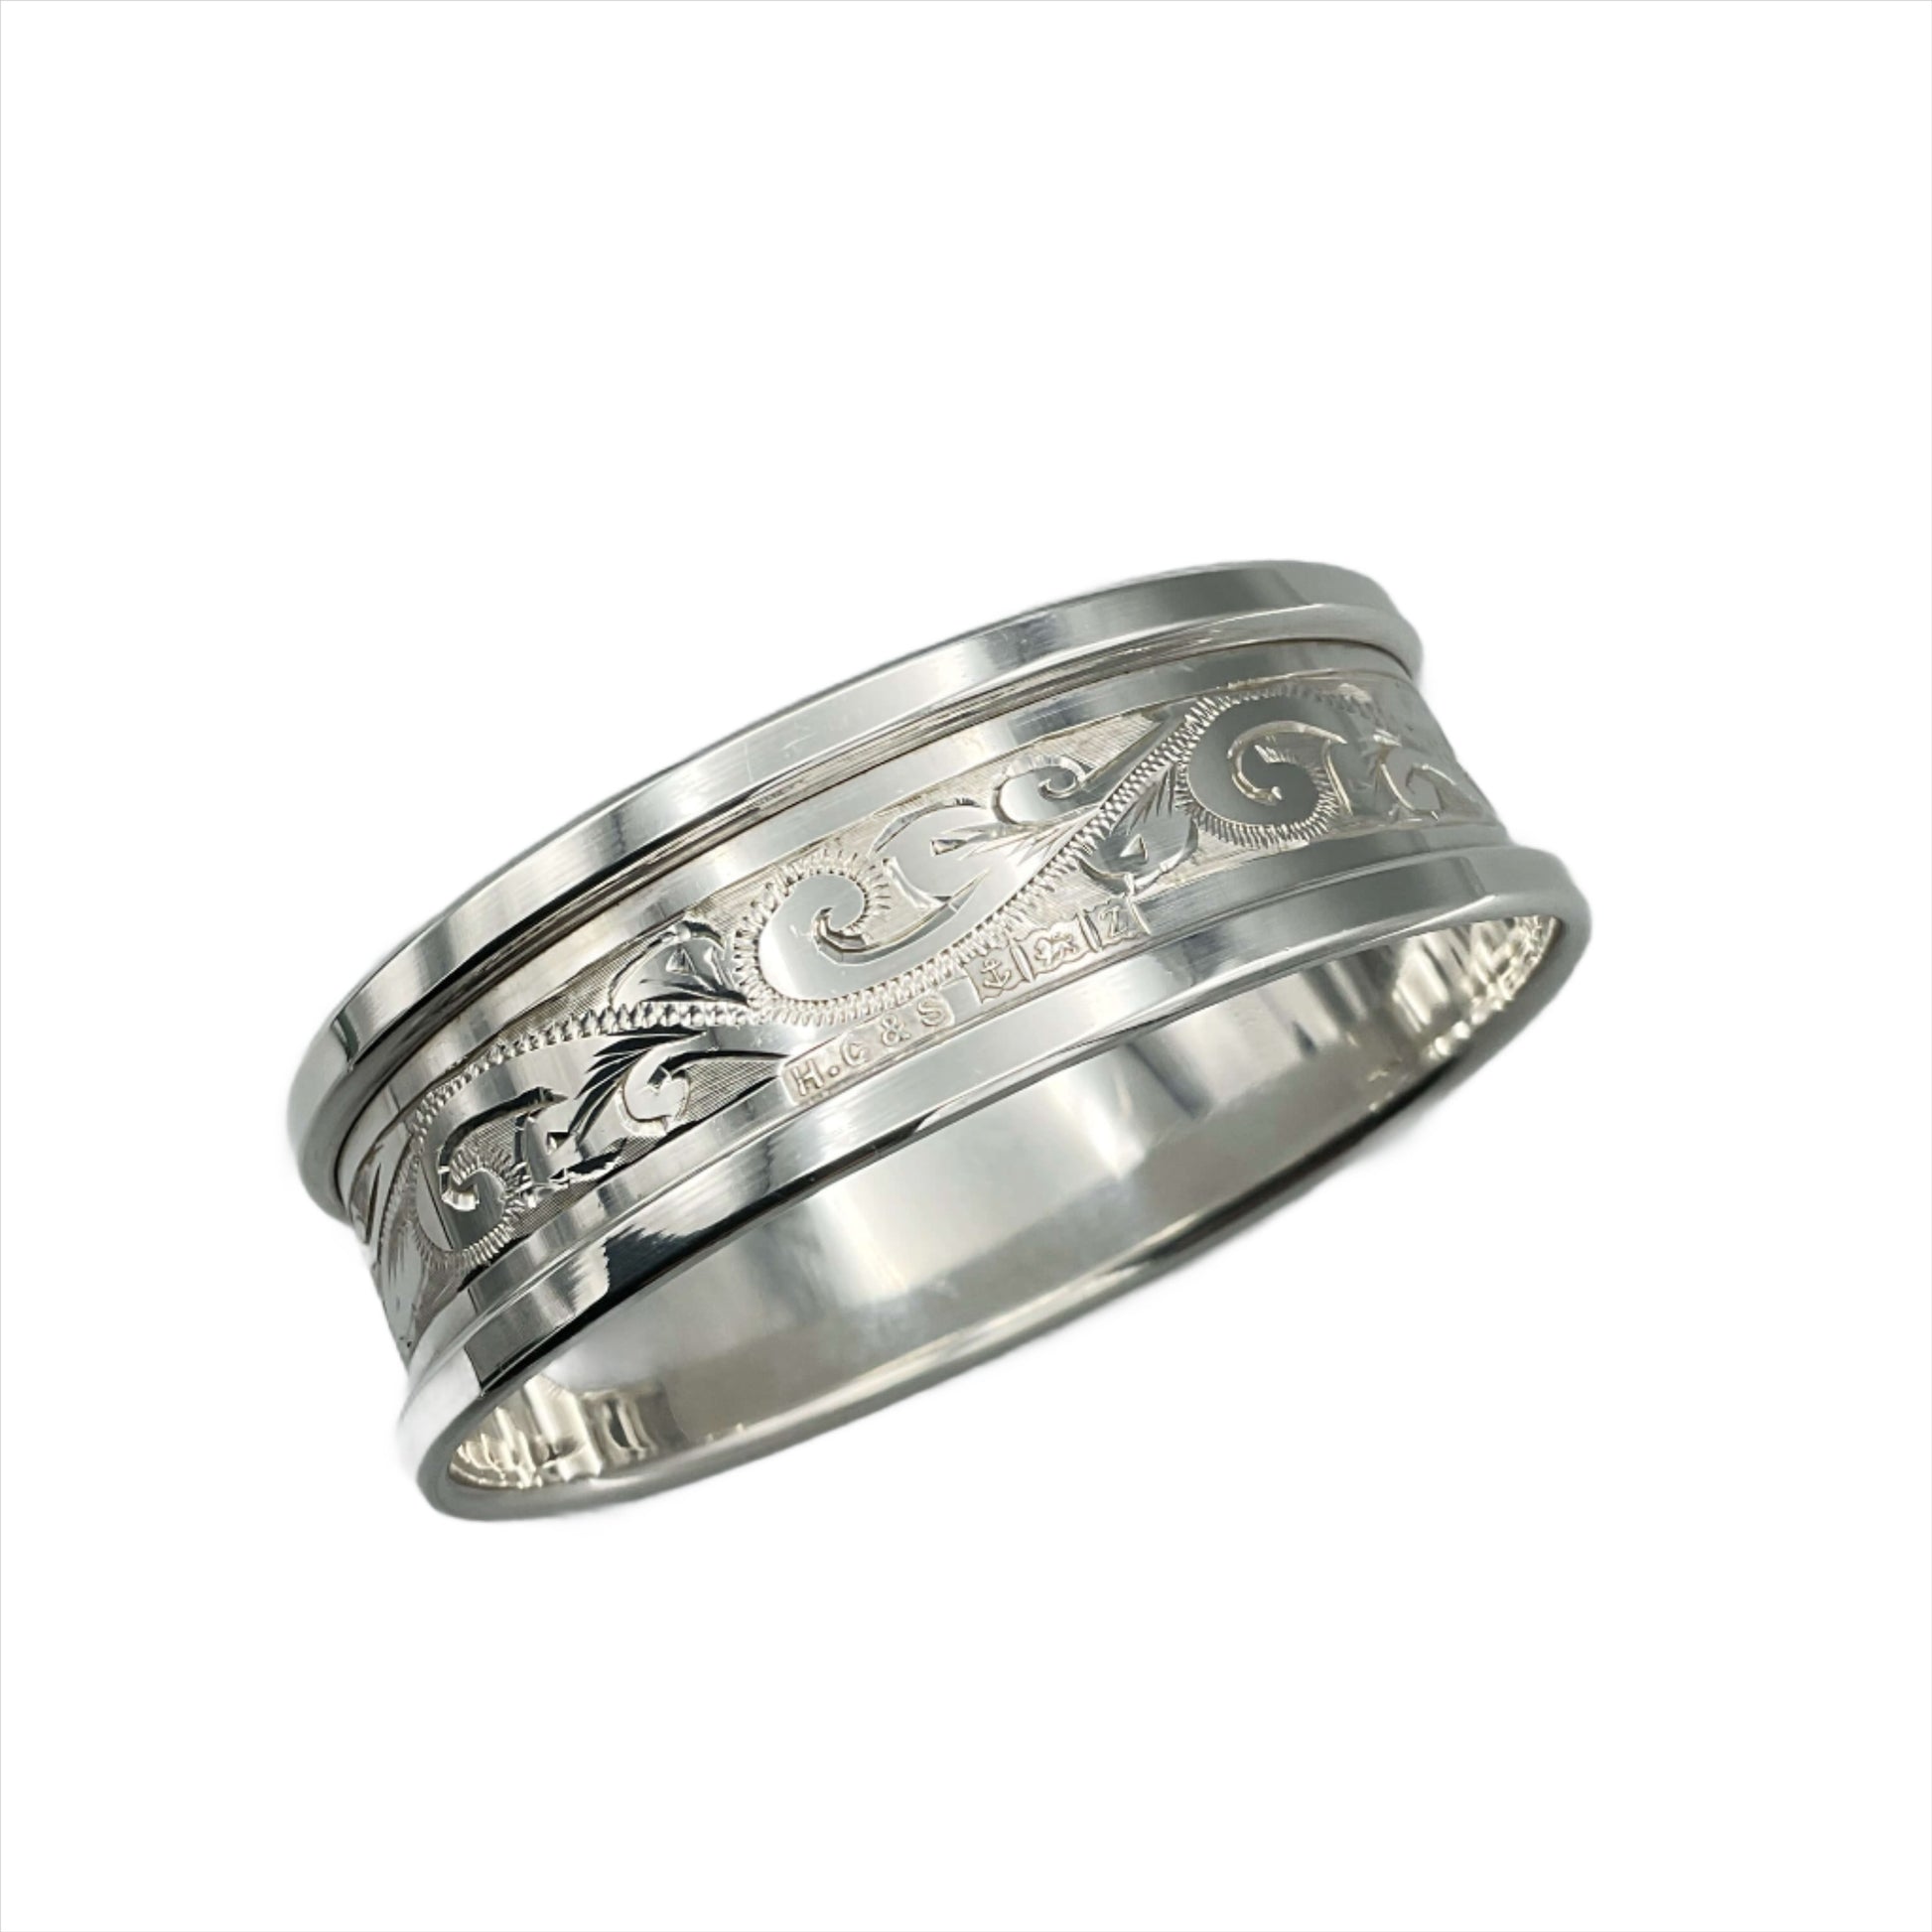 Back of Silver napkin ring with blank rectangular cartouche and etched flower pattern showing hallmarks and maker's marks